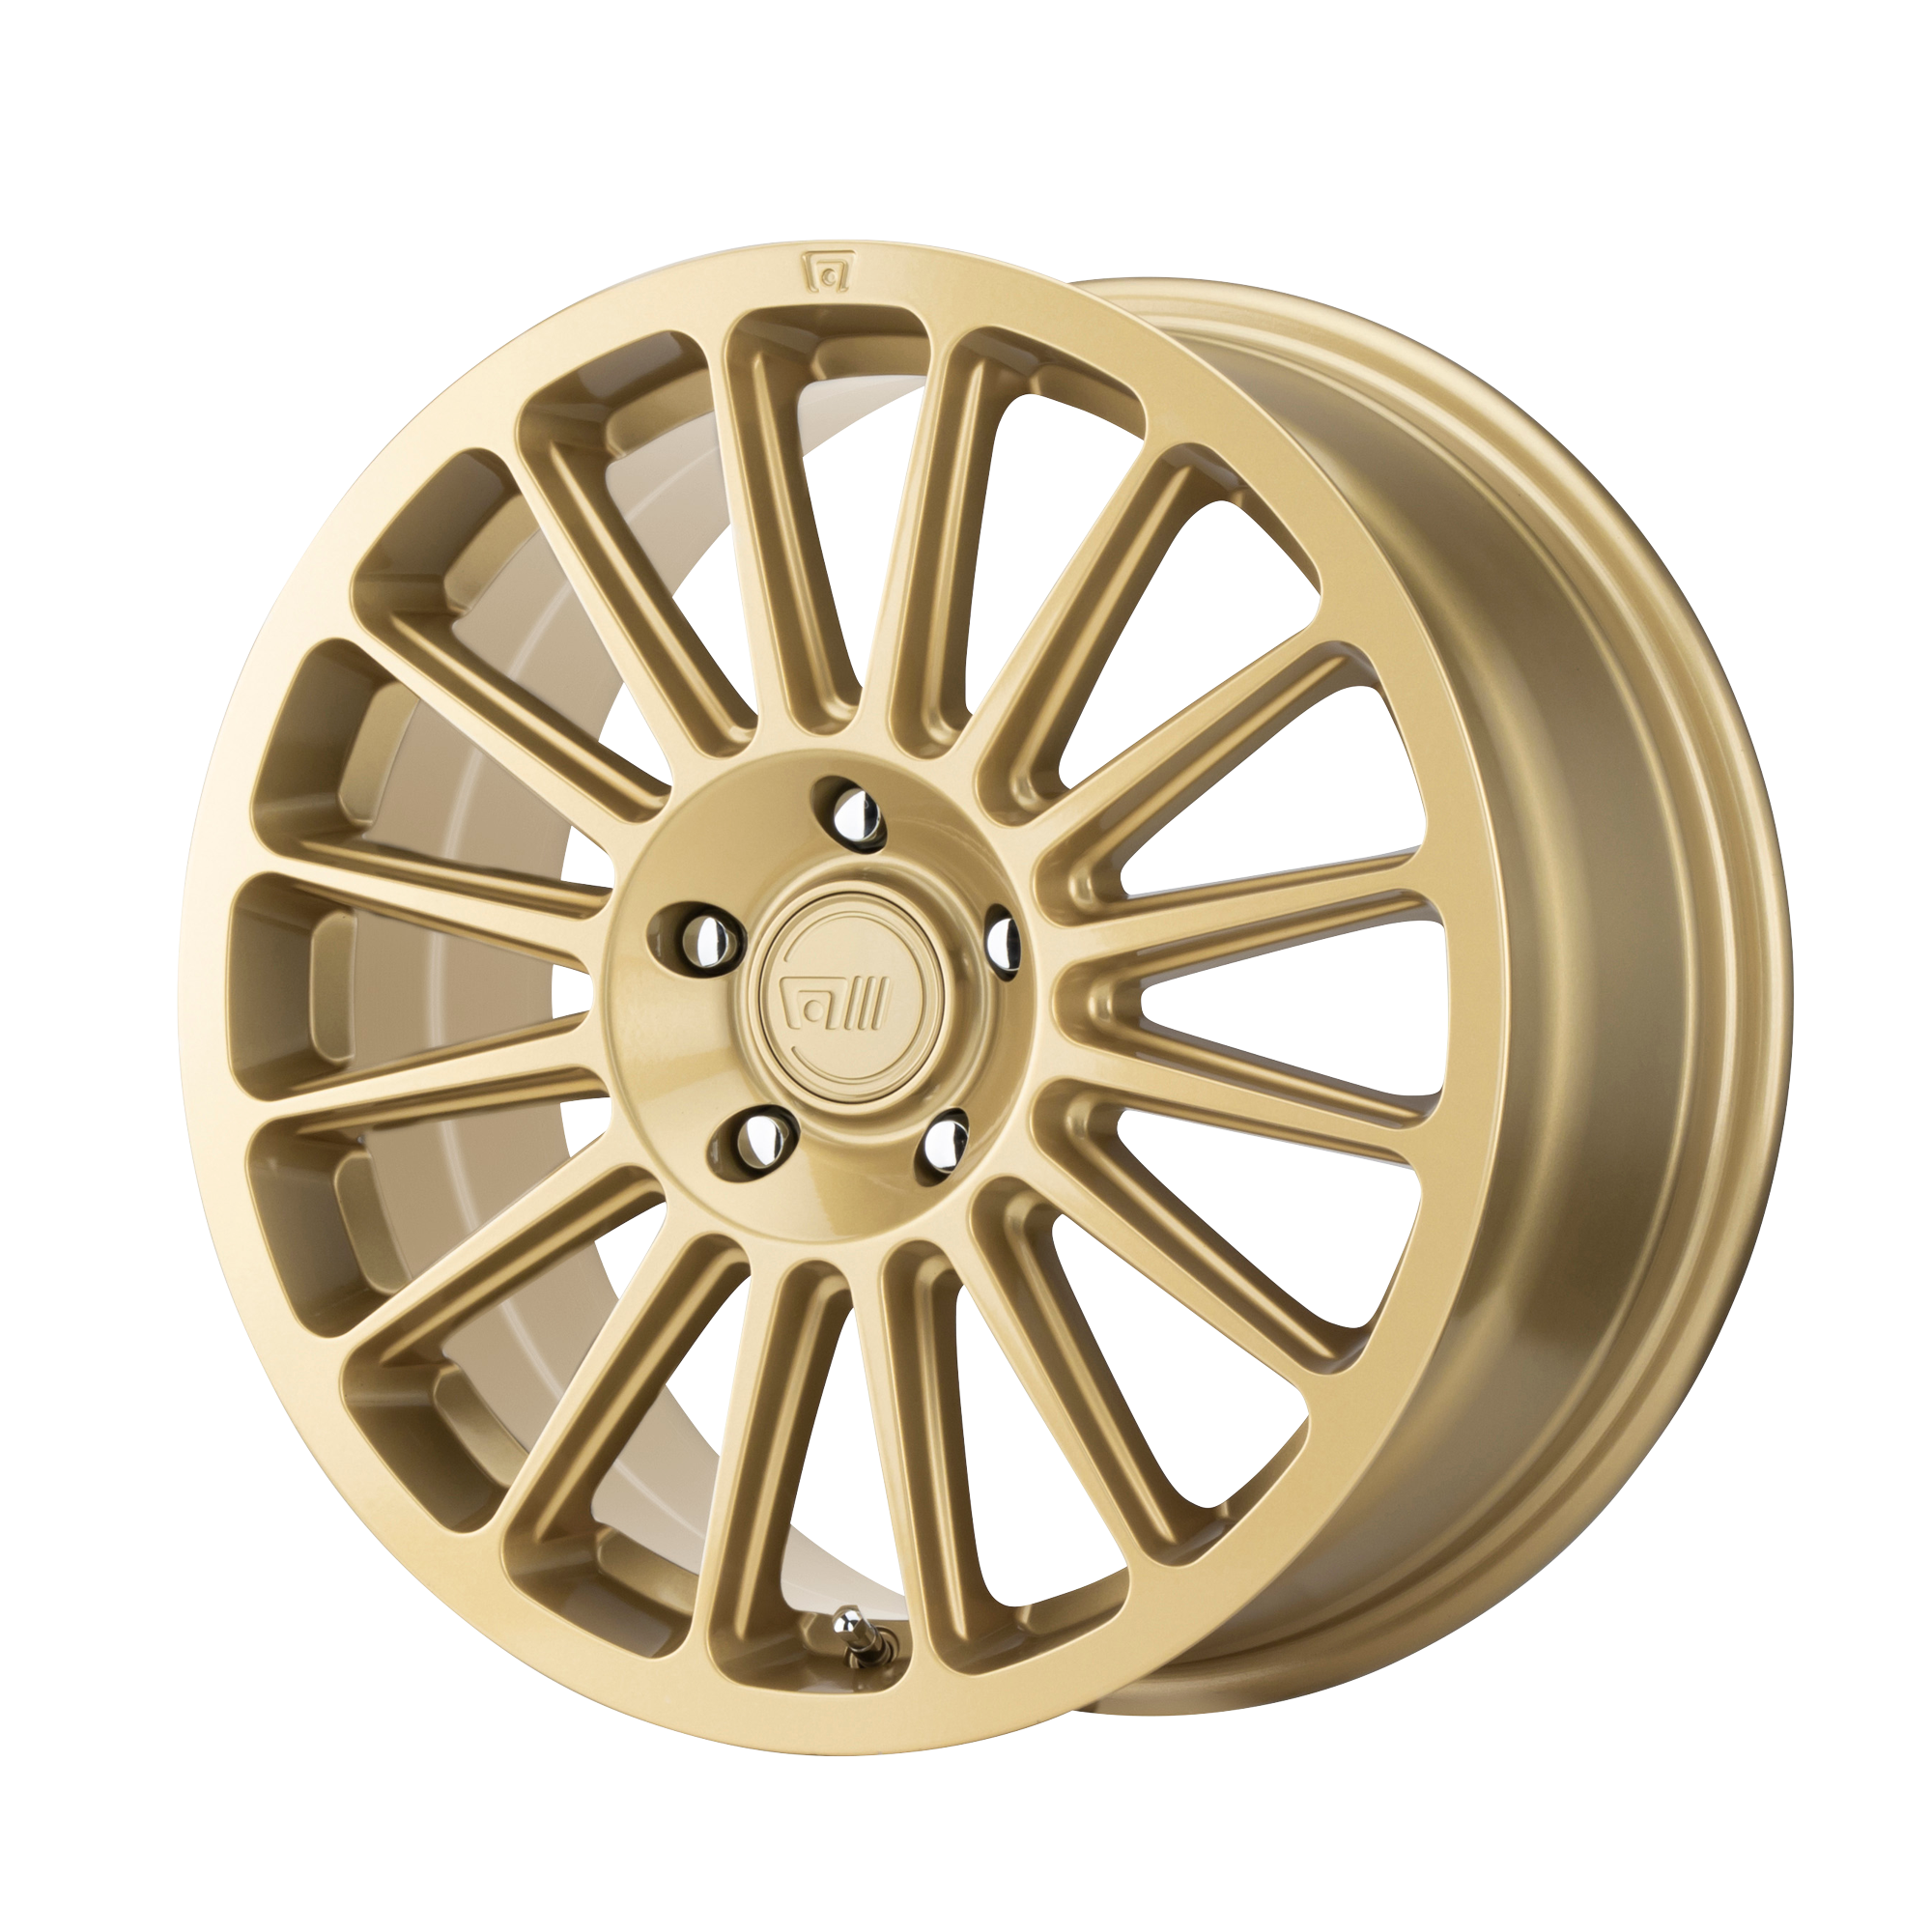 MR141 17x7.5 5x112.00 RALLY GOLD (40 mm) - Tires and Engine Performance